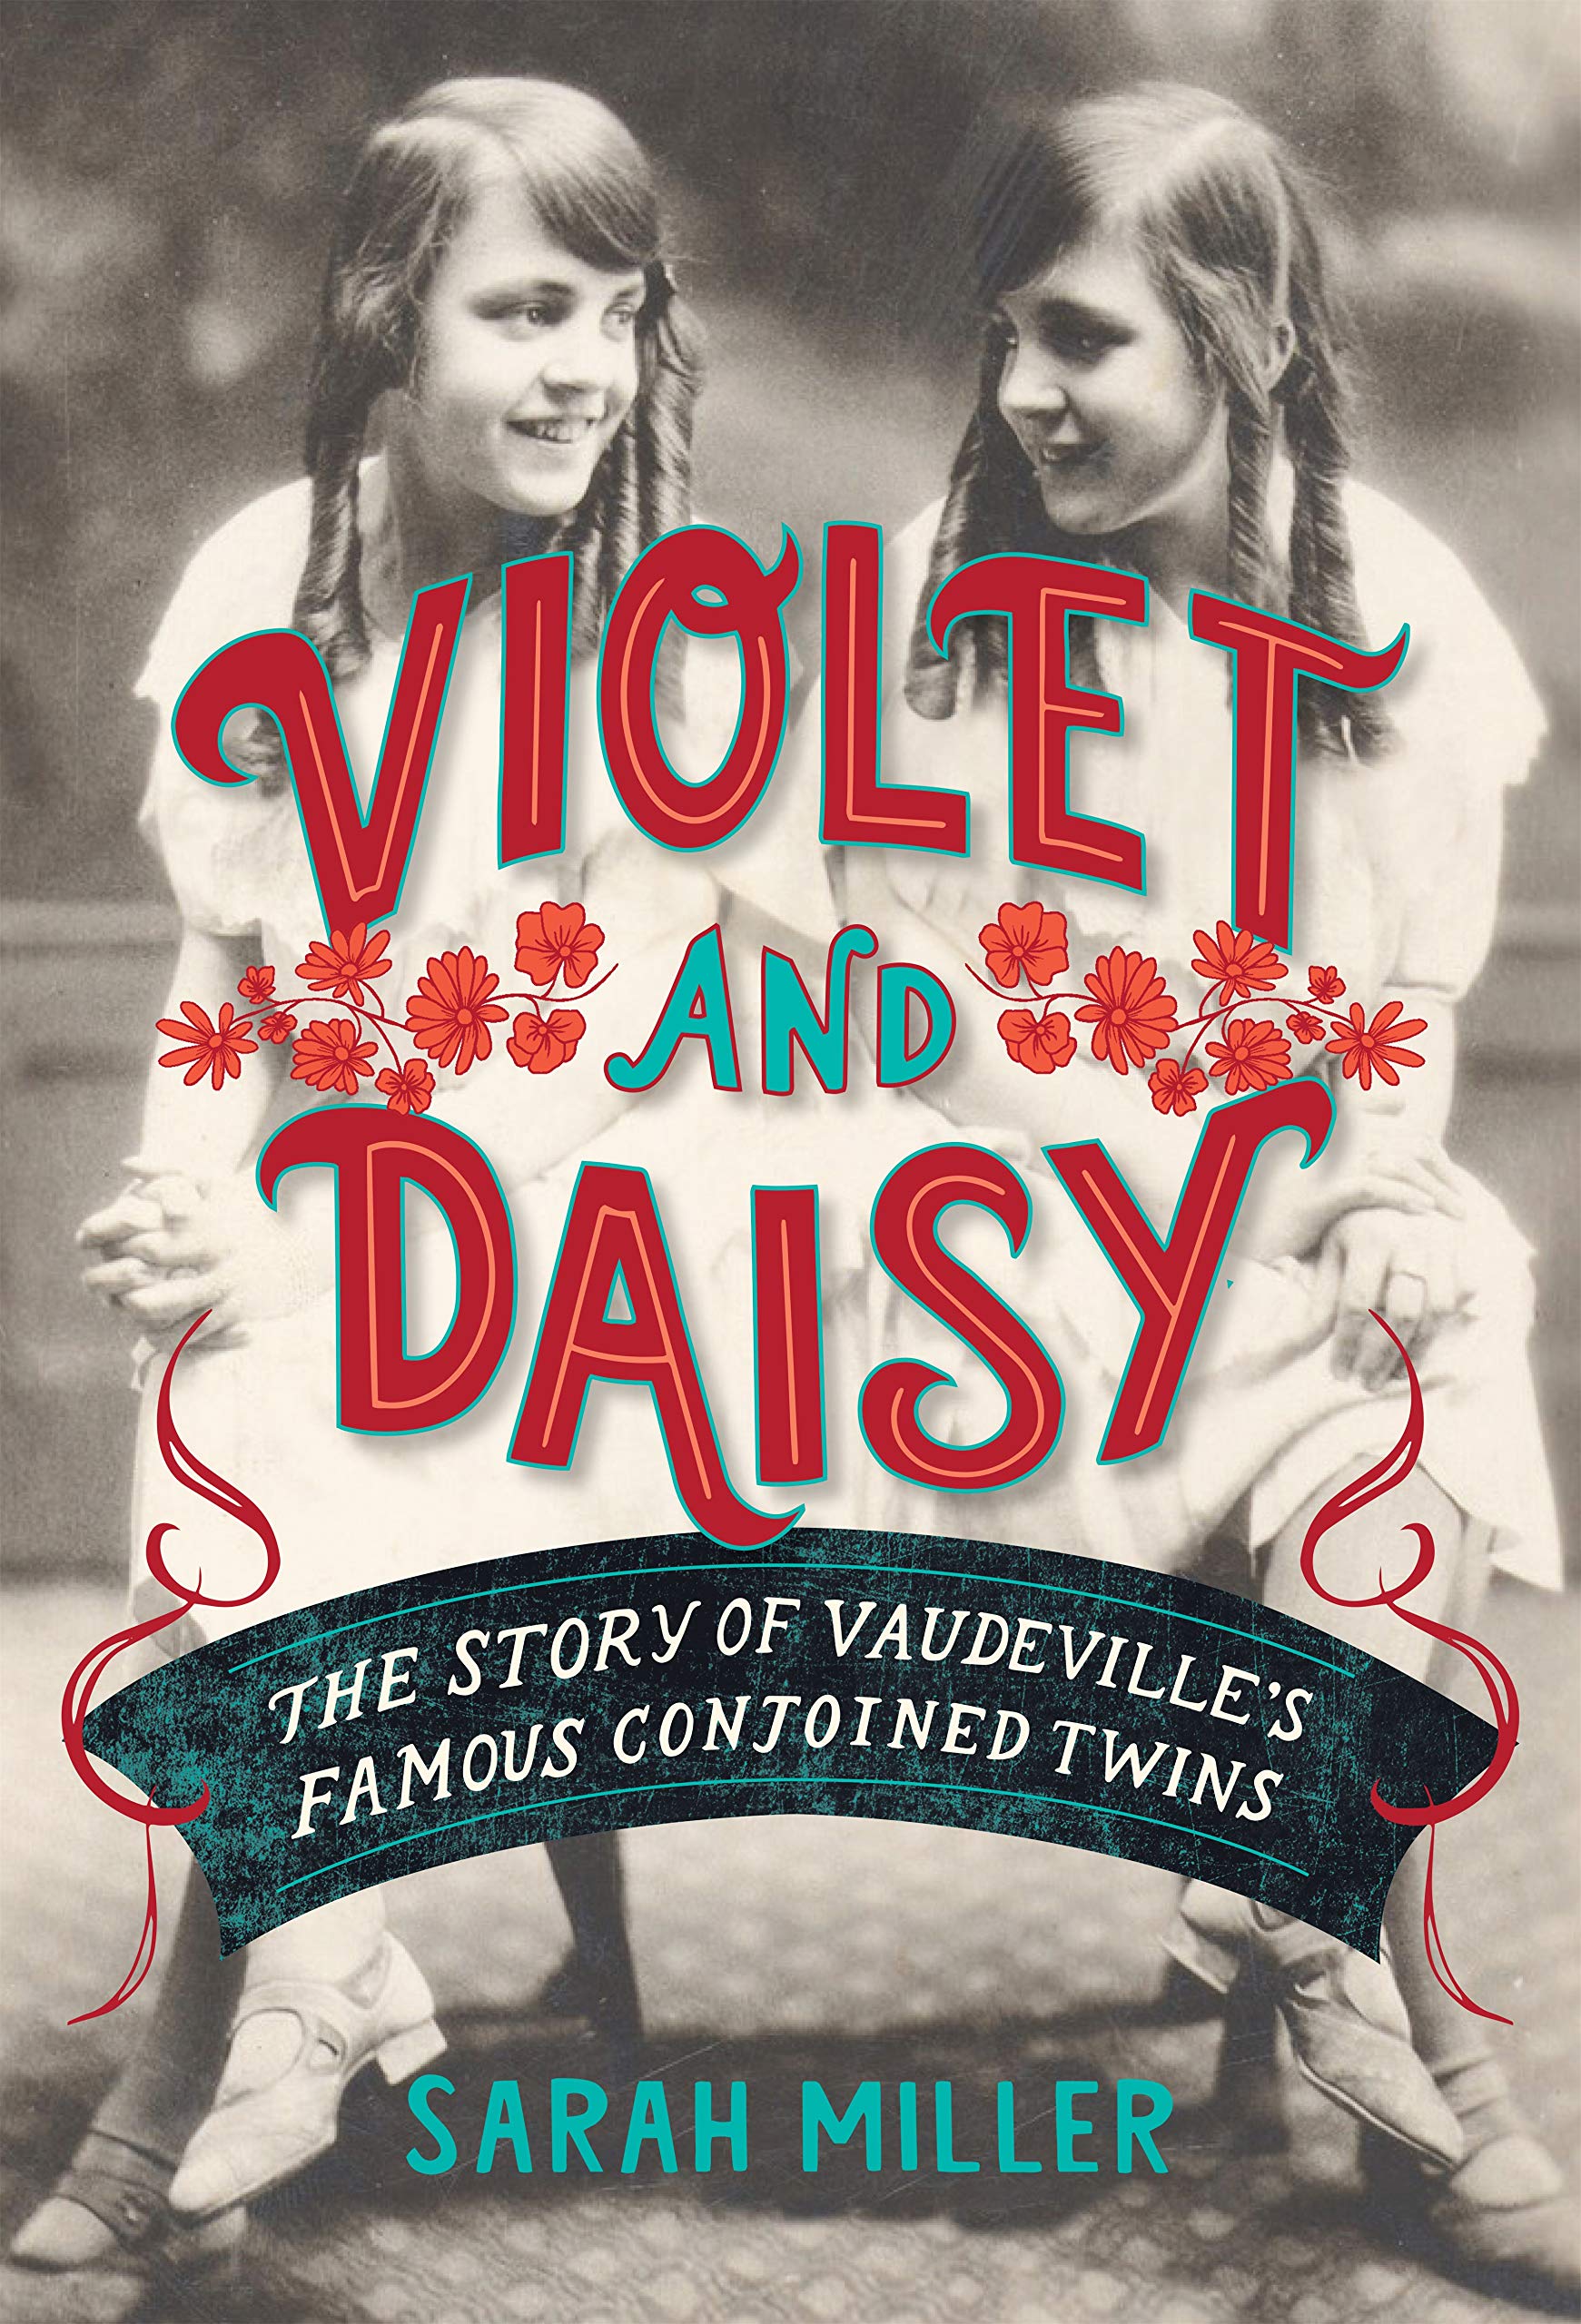 Violet & Daisy: The Story of Vaudeville’s Famous Conjoined Twins